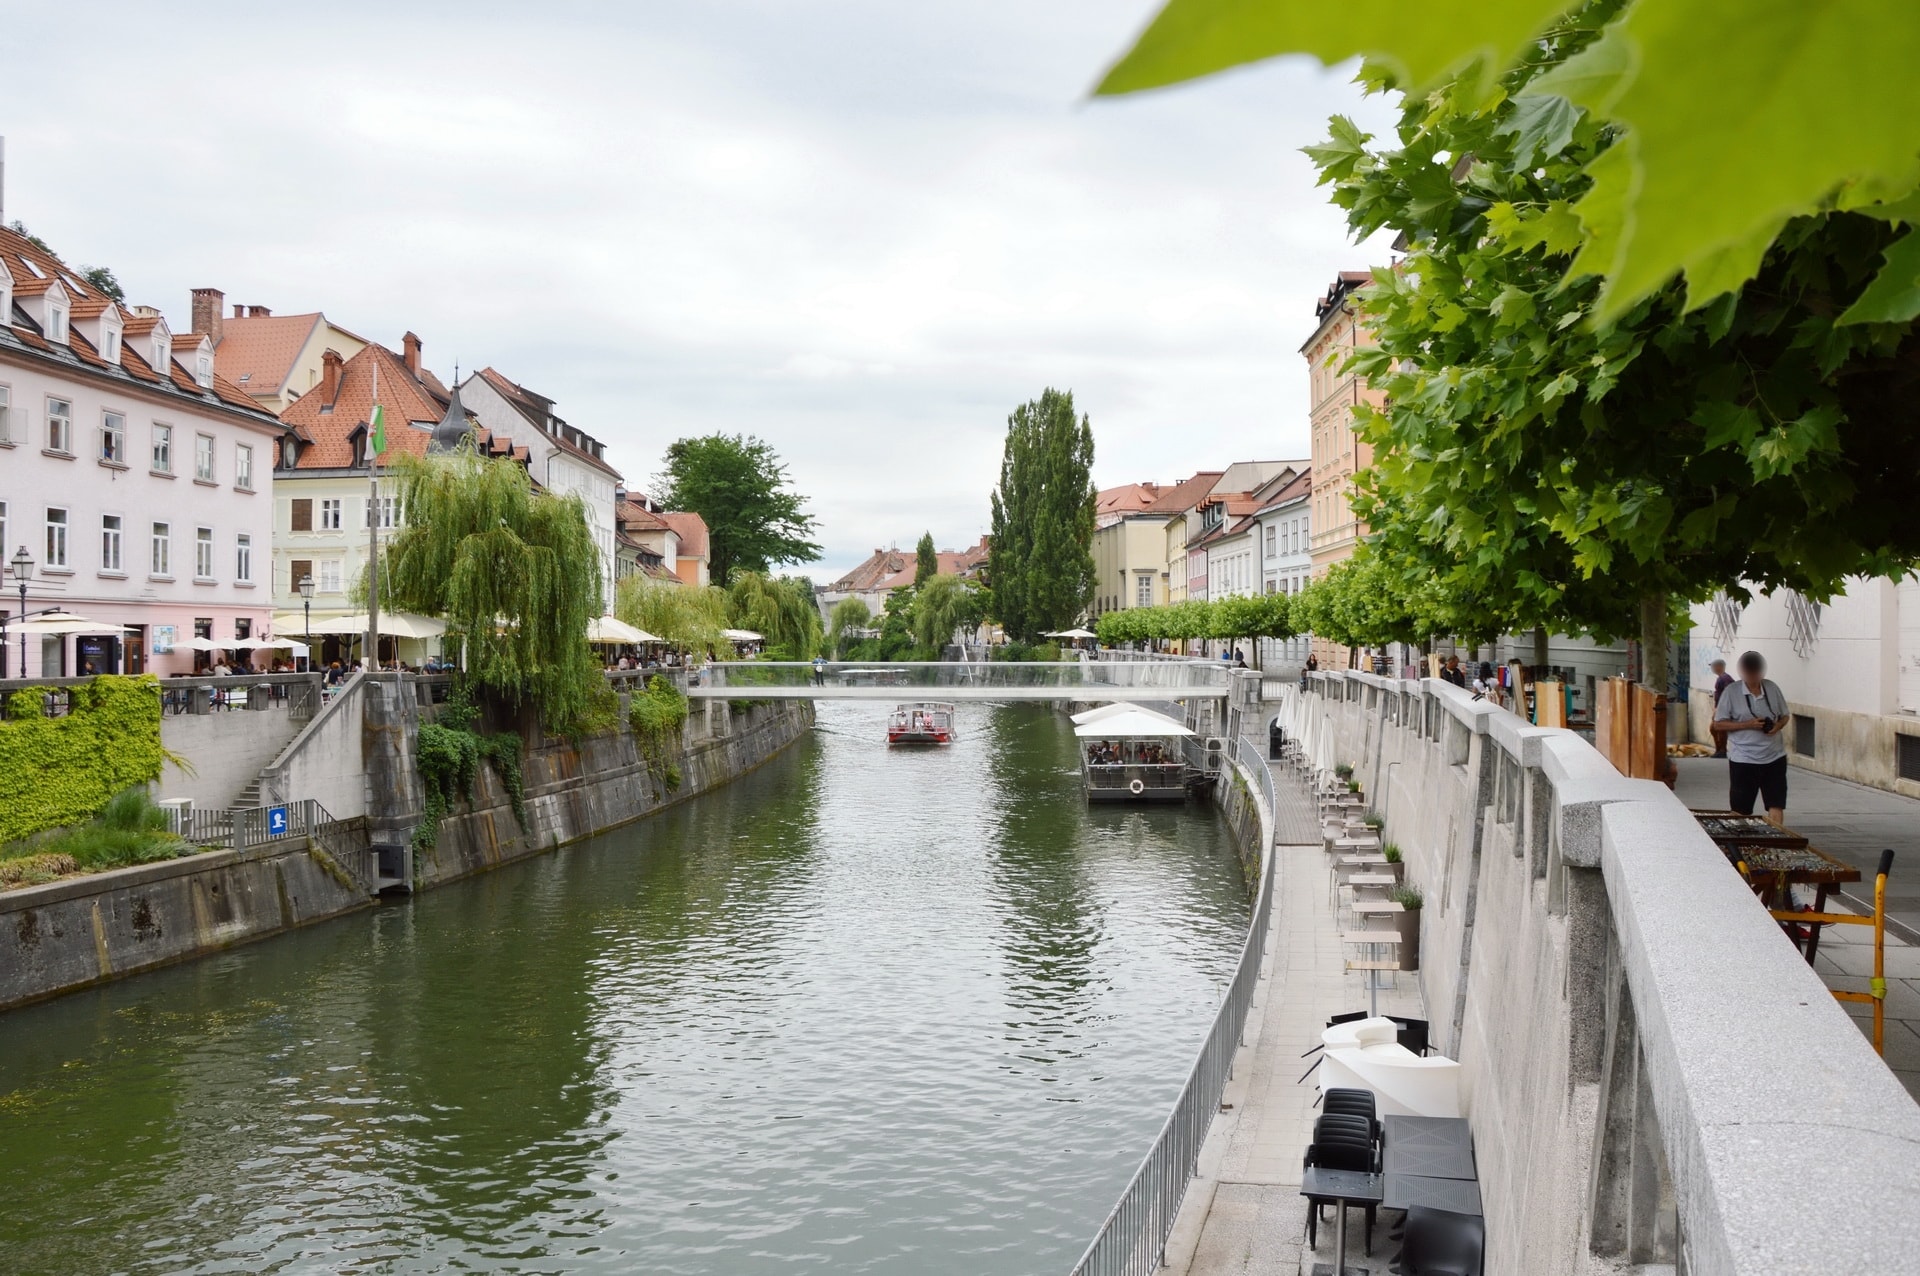 Embankments in Ljubljana are lined with trees